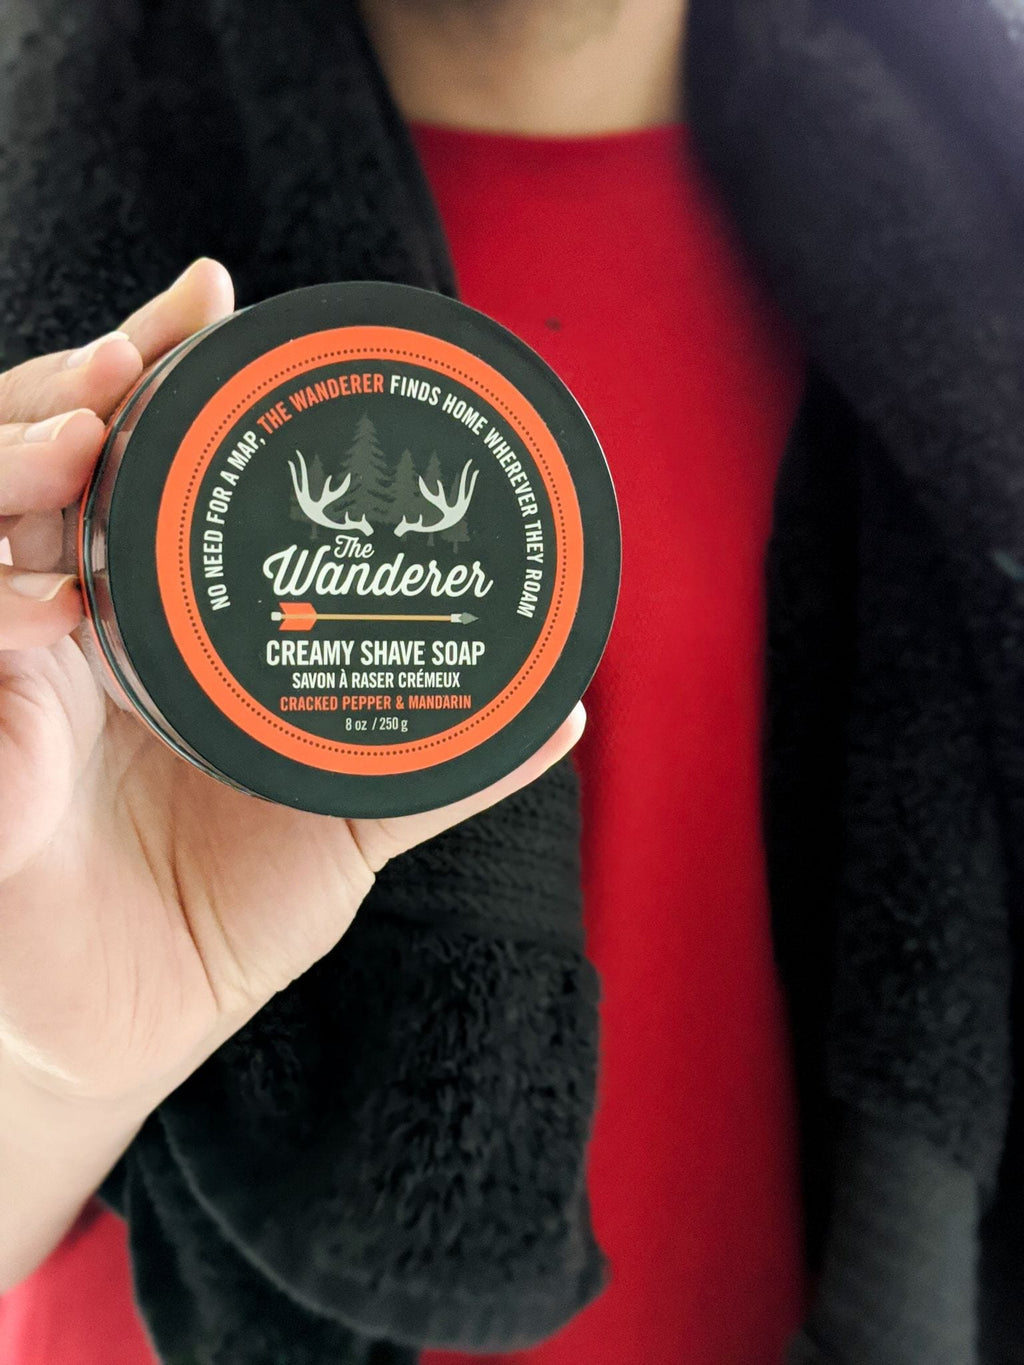 WW The Wanderer Creamy Shave Soap in Cracked Pepper & Mandarin